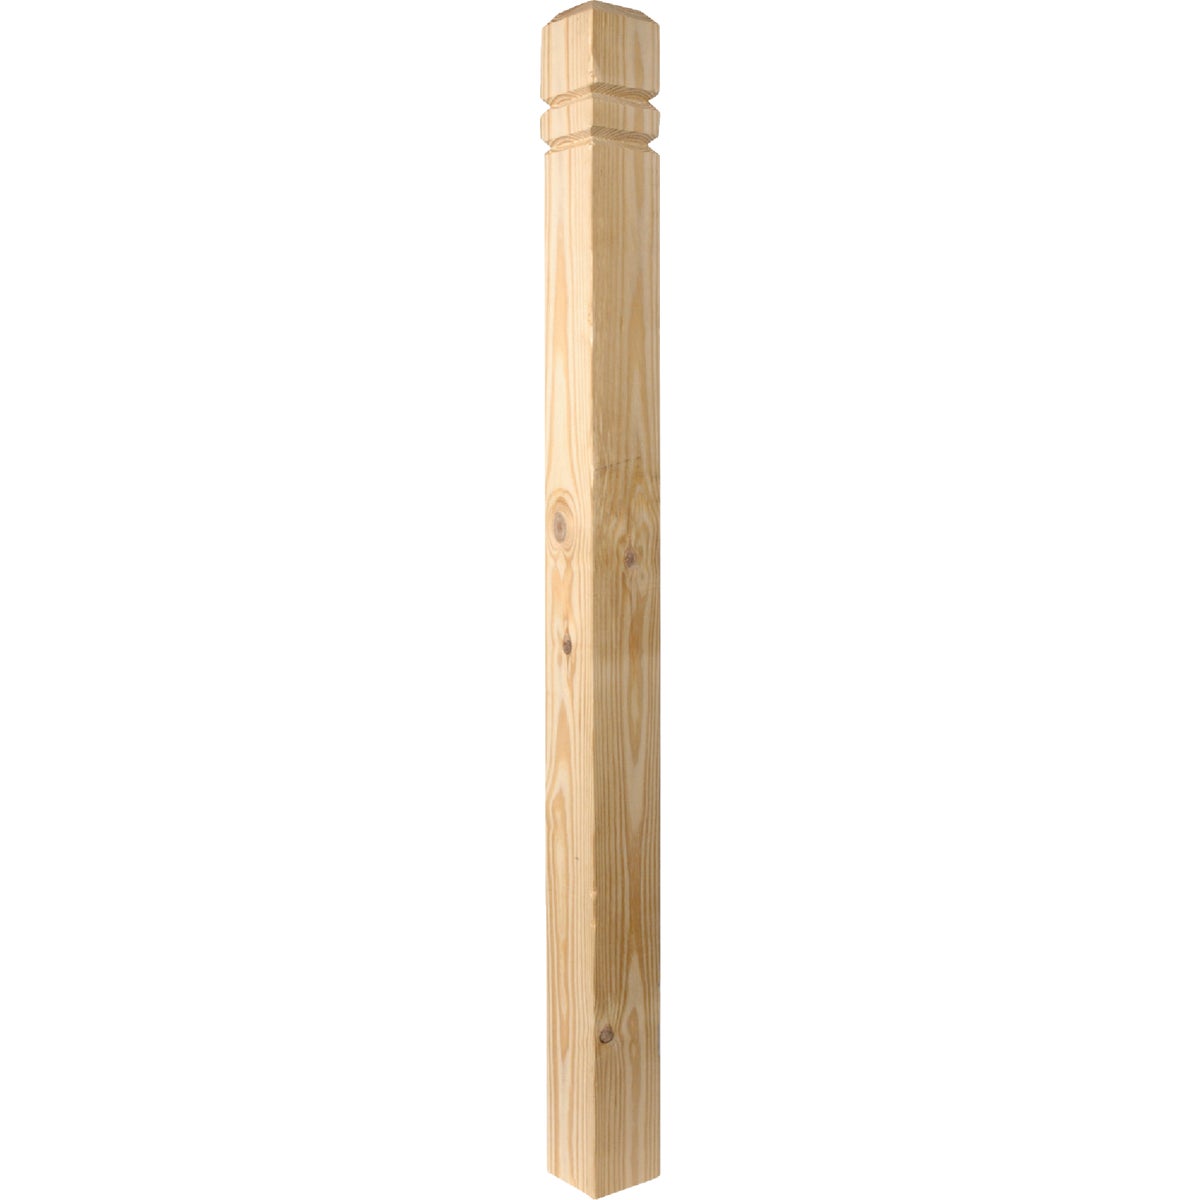 Item 162302, 4 In. x 4 In. x 54 In. double V-groove treated post.